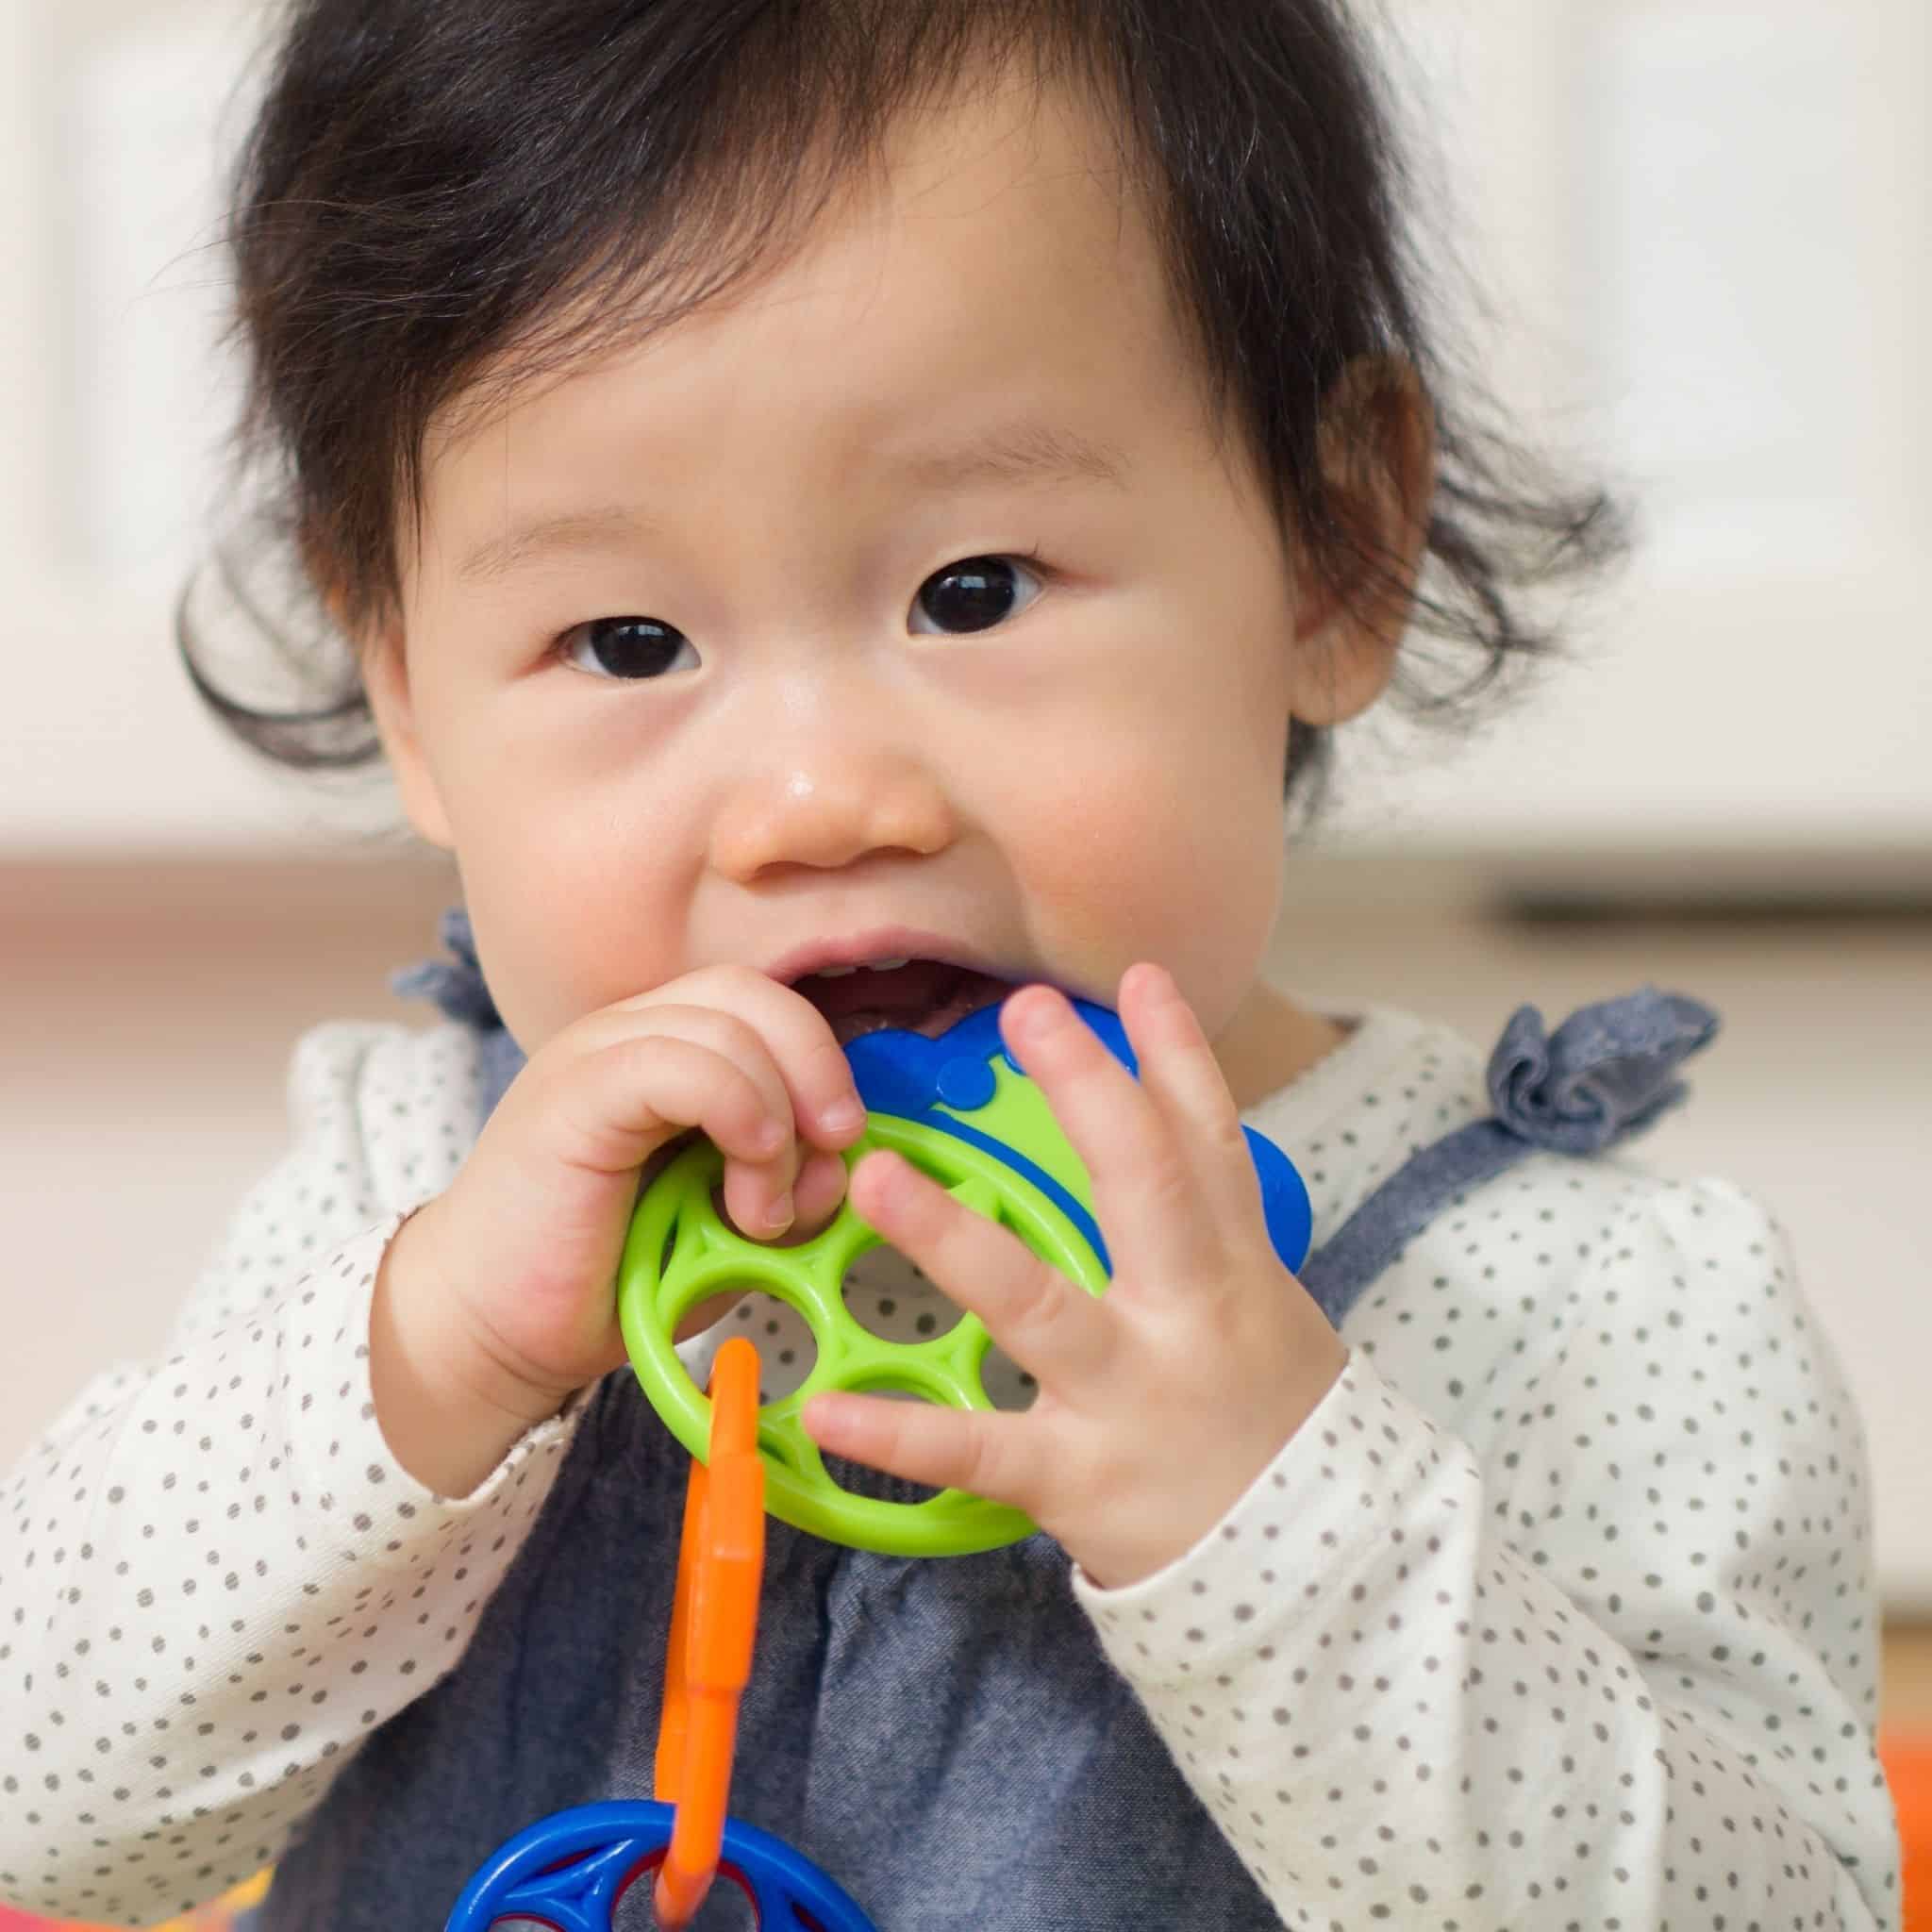 A Parent’s Guide to Making Teething Easier for You and Your Baby